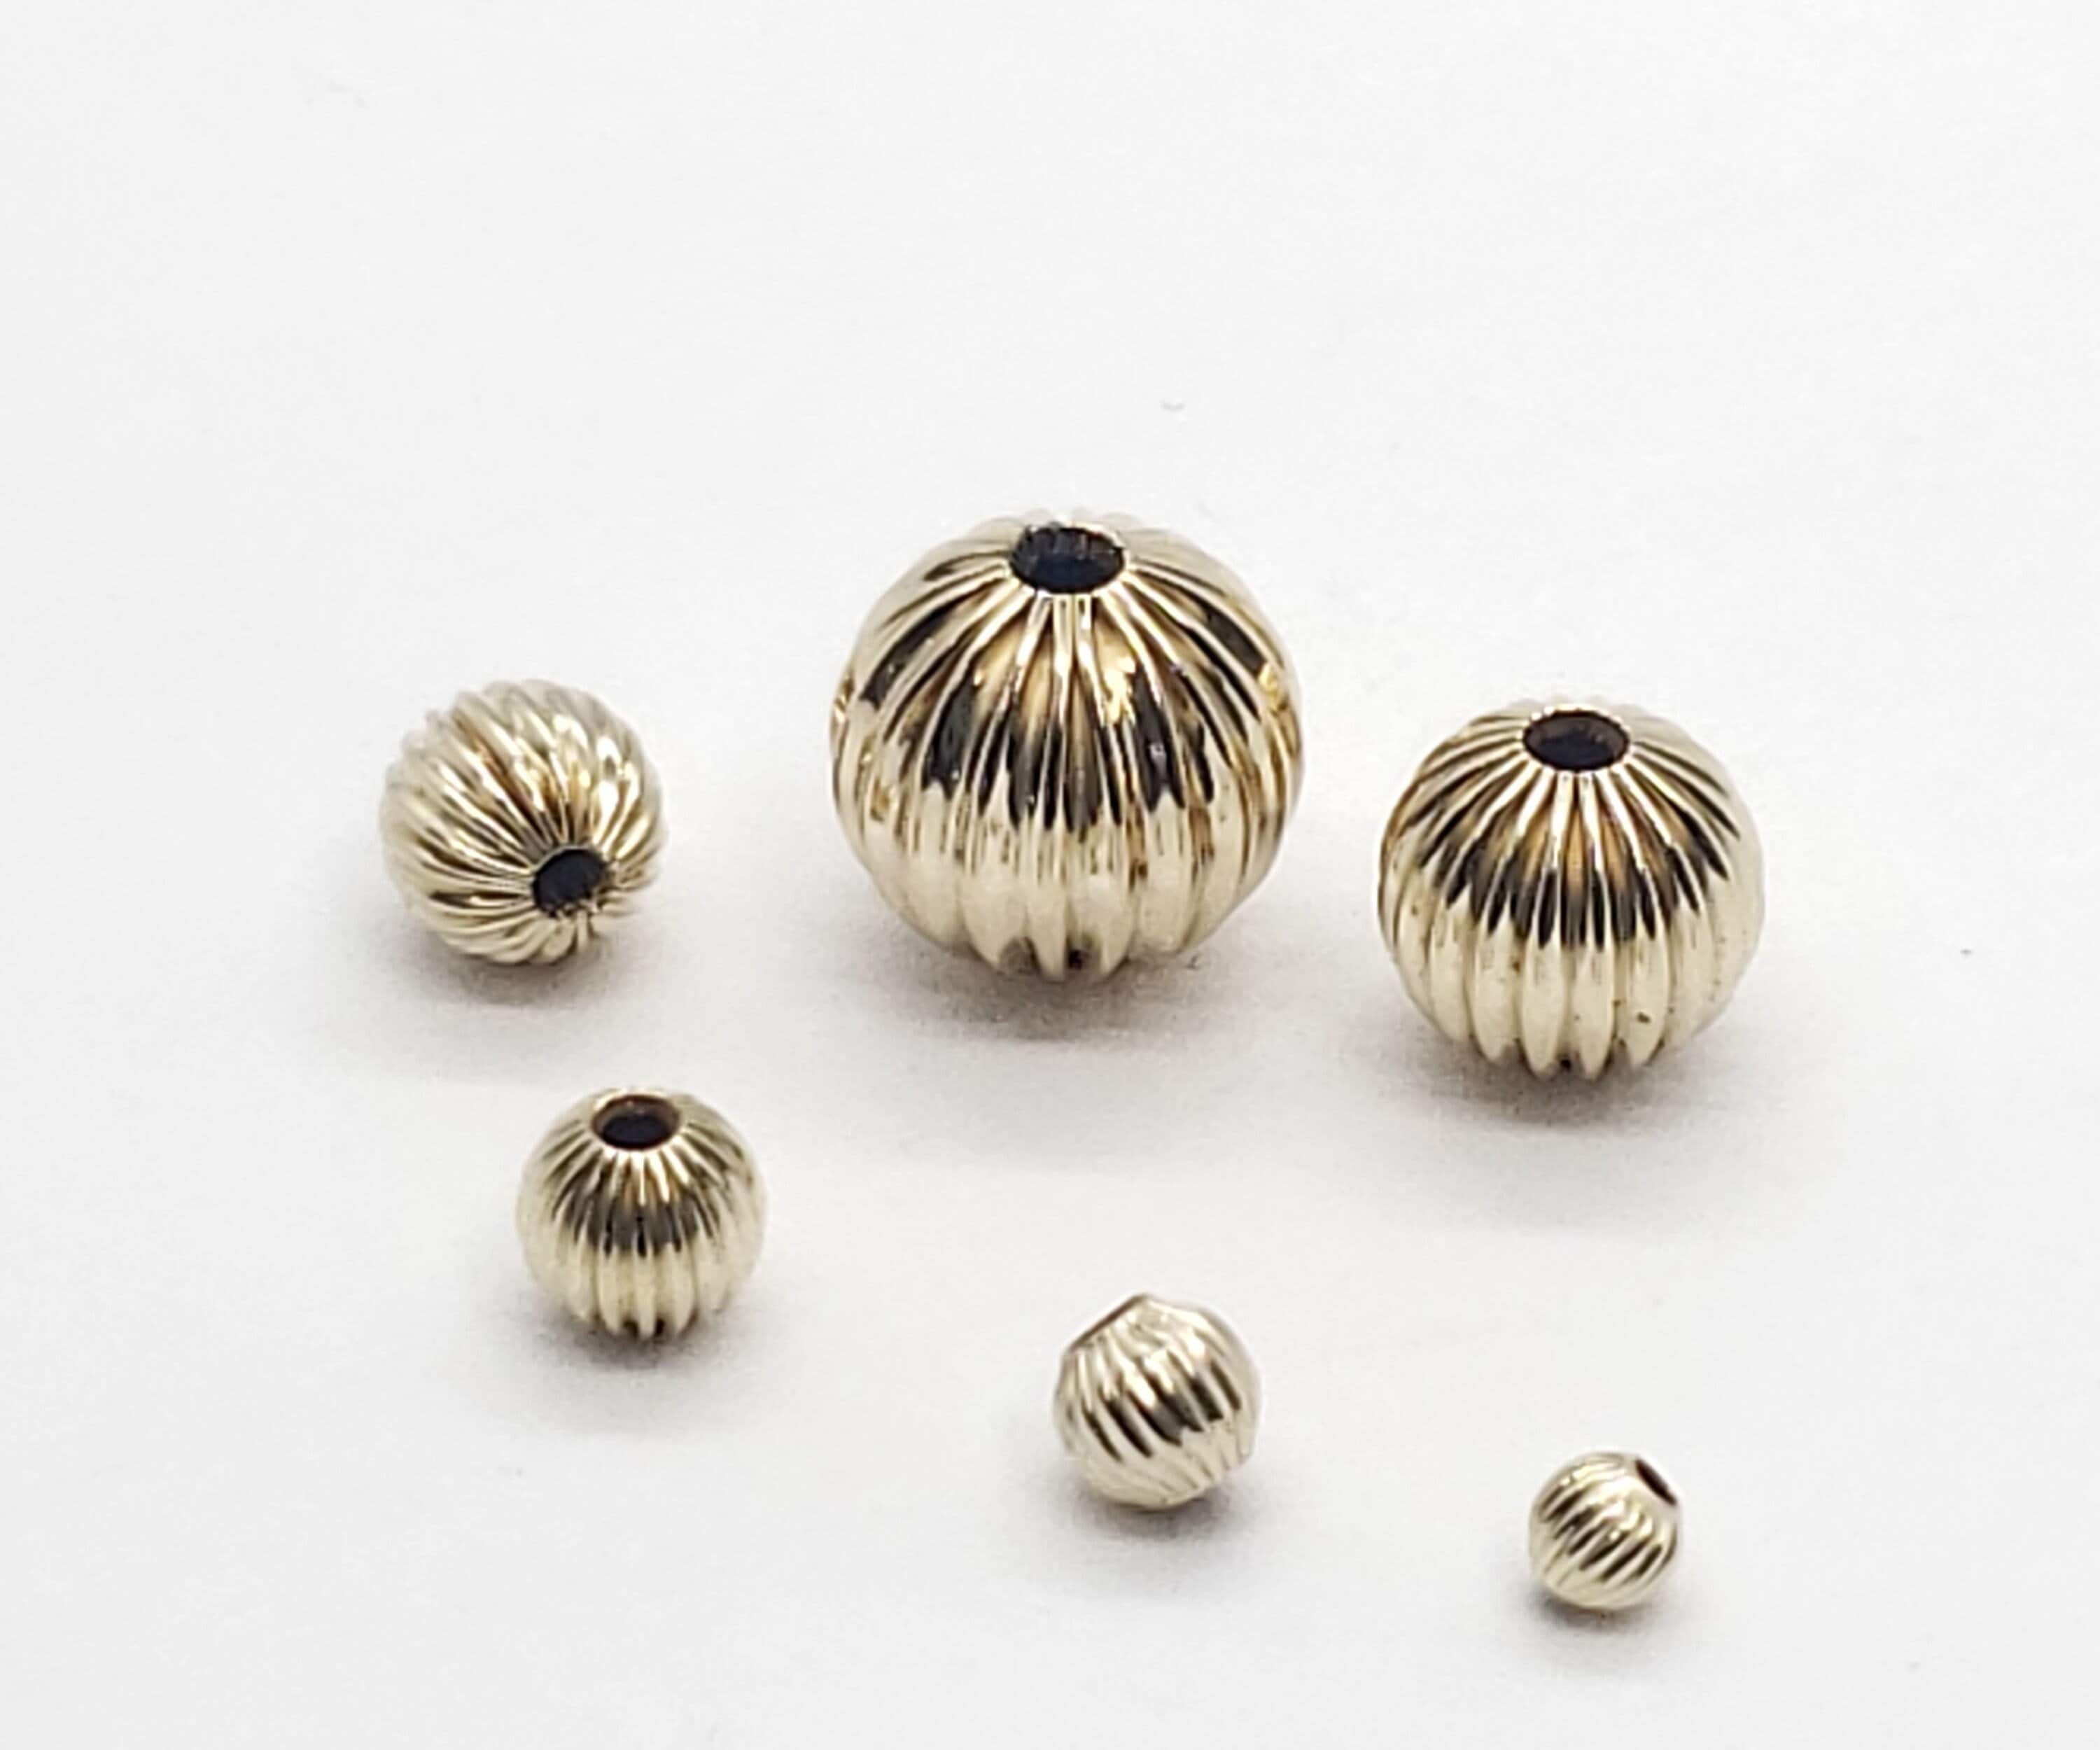 50 Small 4mm Metal Corrugated Striped Bicone Spacer Beads for